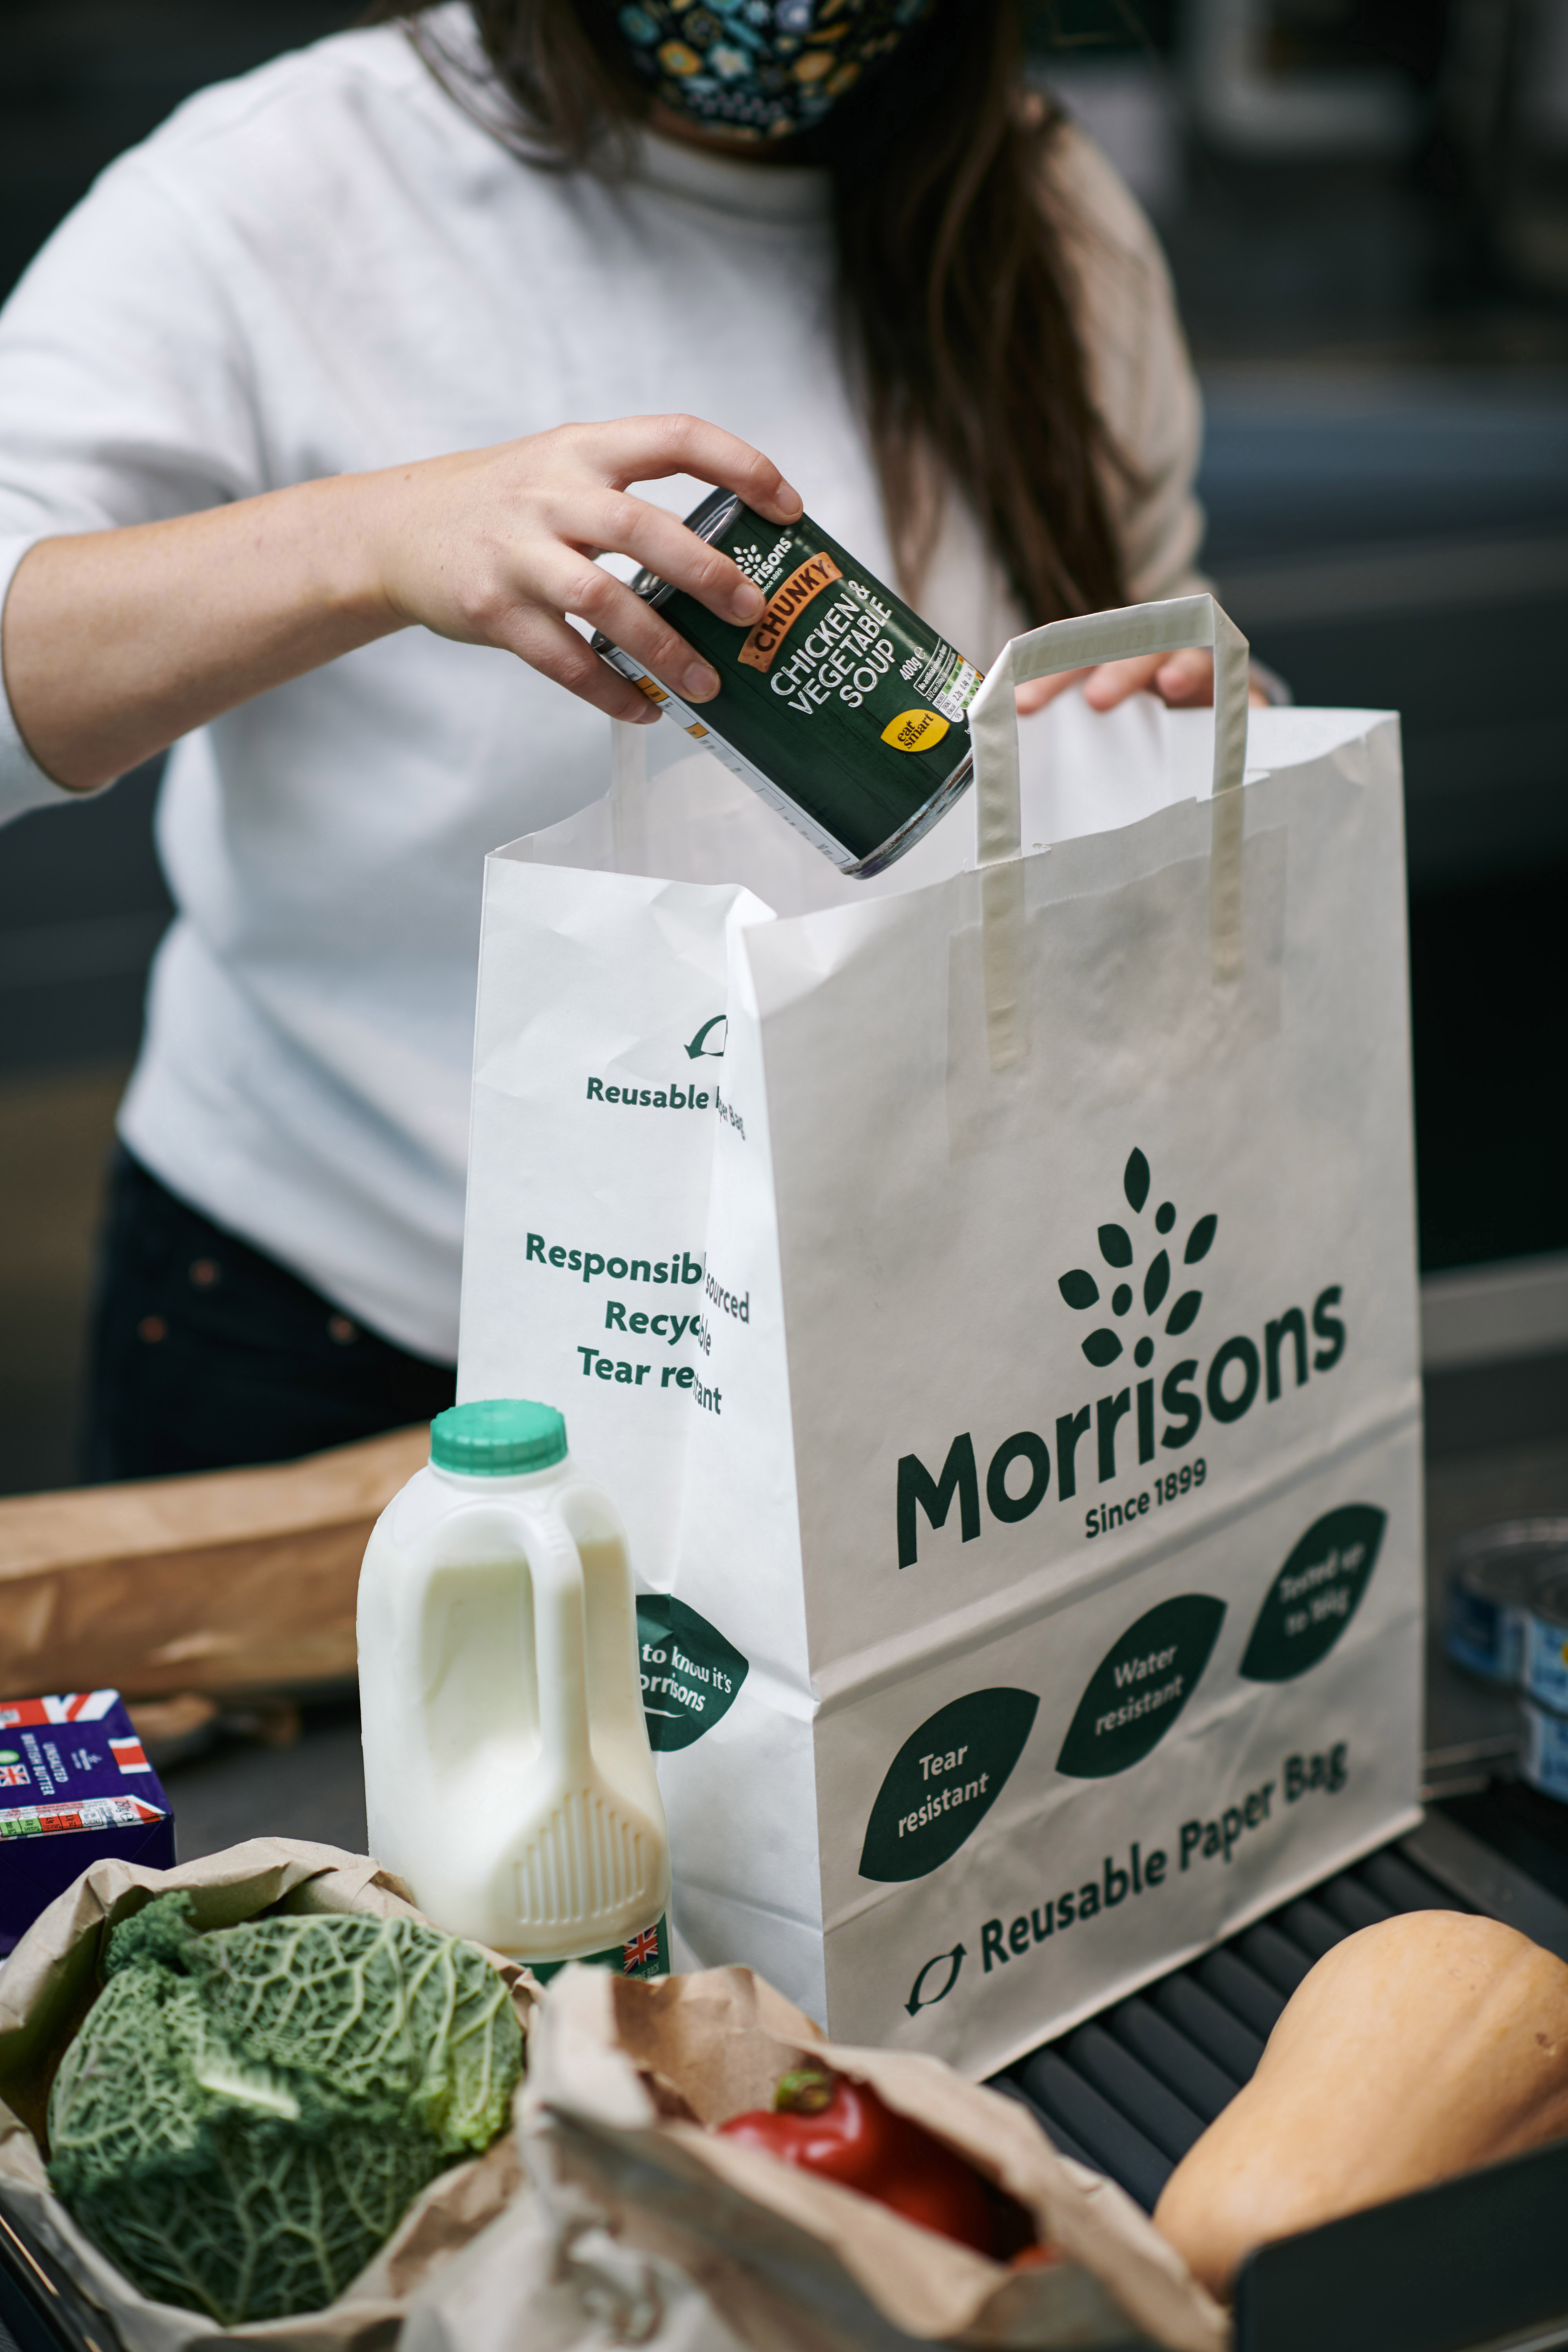 Morrisons has said customers will be able to buy 30p paper bags 